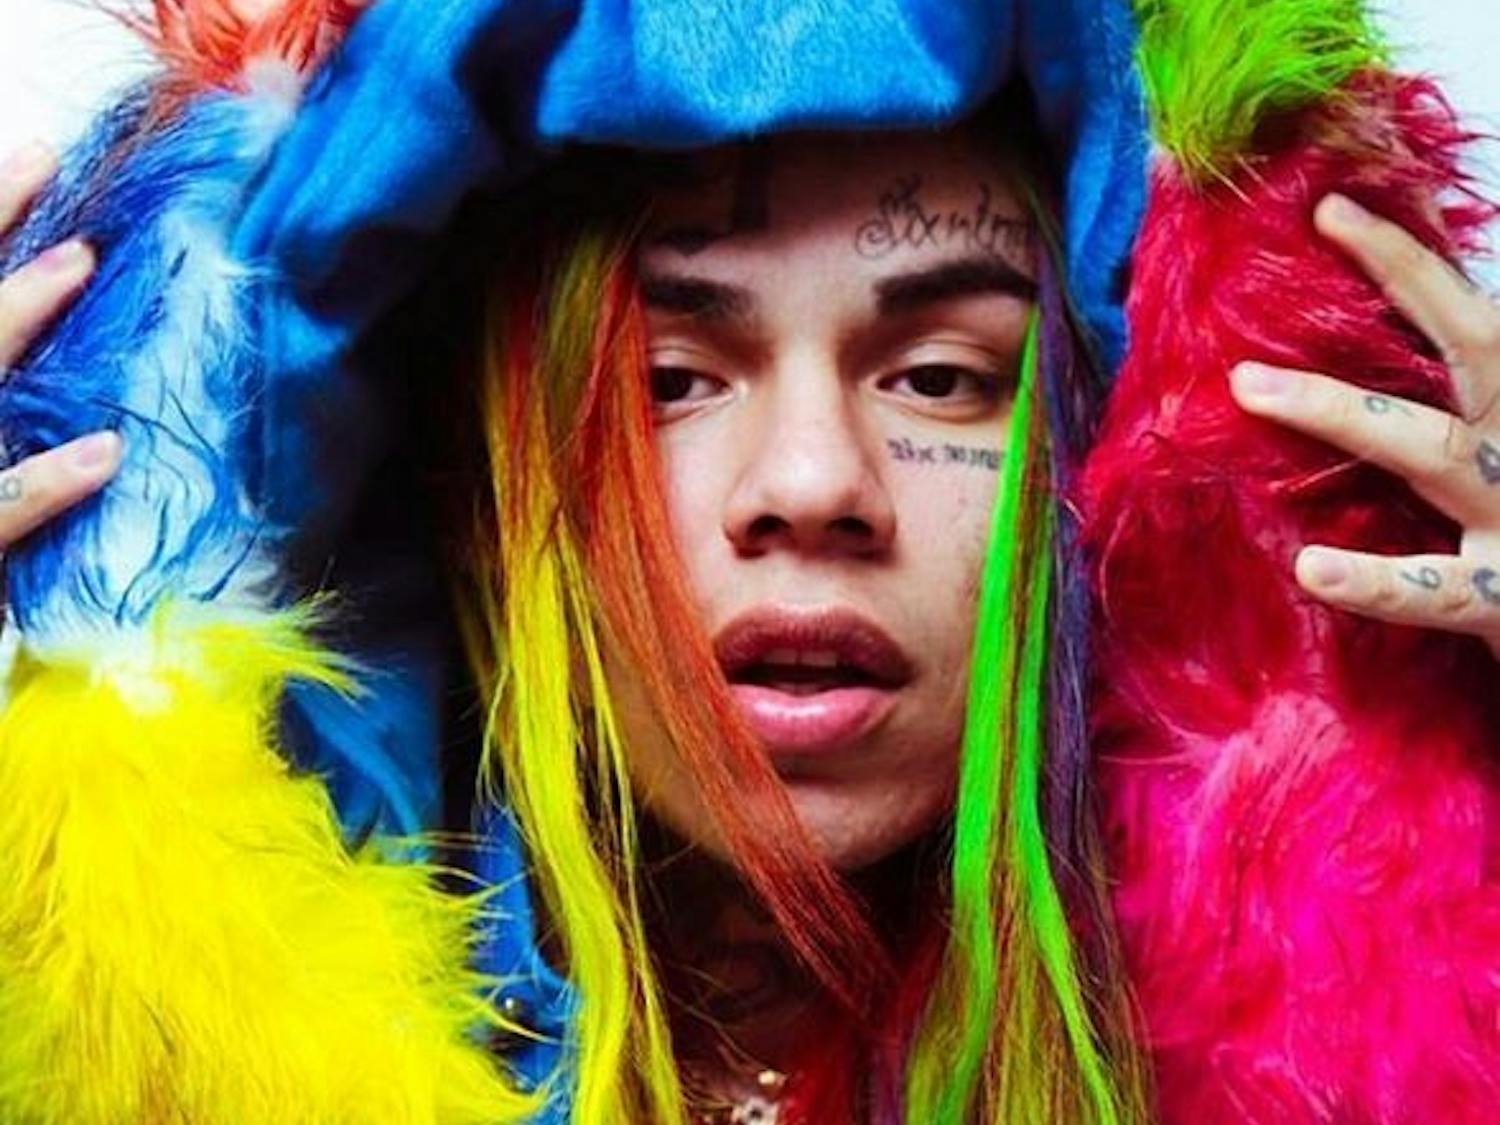 Don't let the bright accents of his eccentric looks fool you &mdash; 6ix9ine has a dark history.